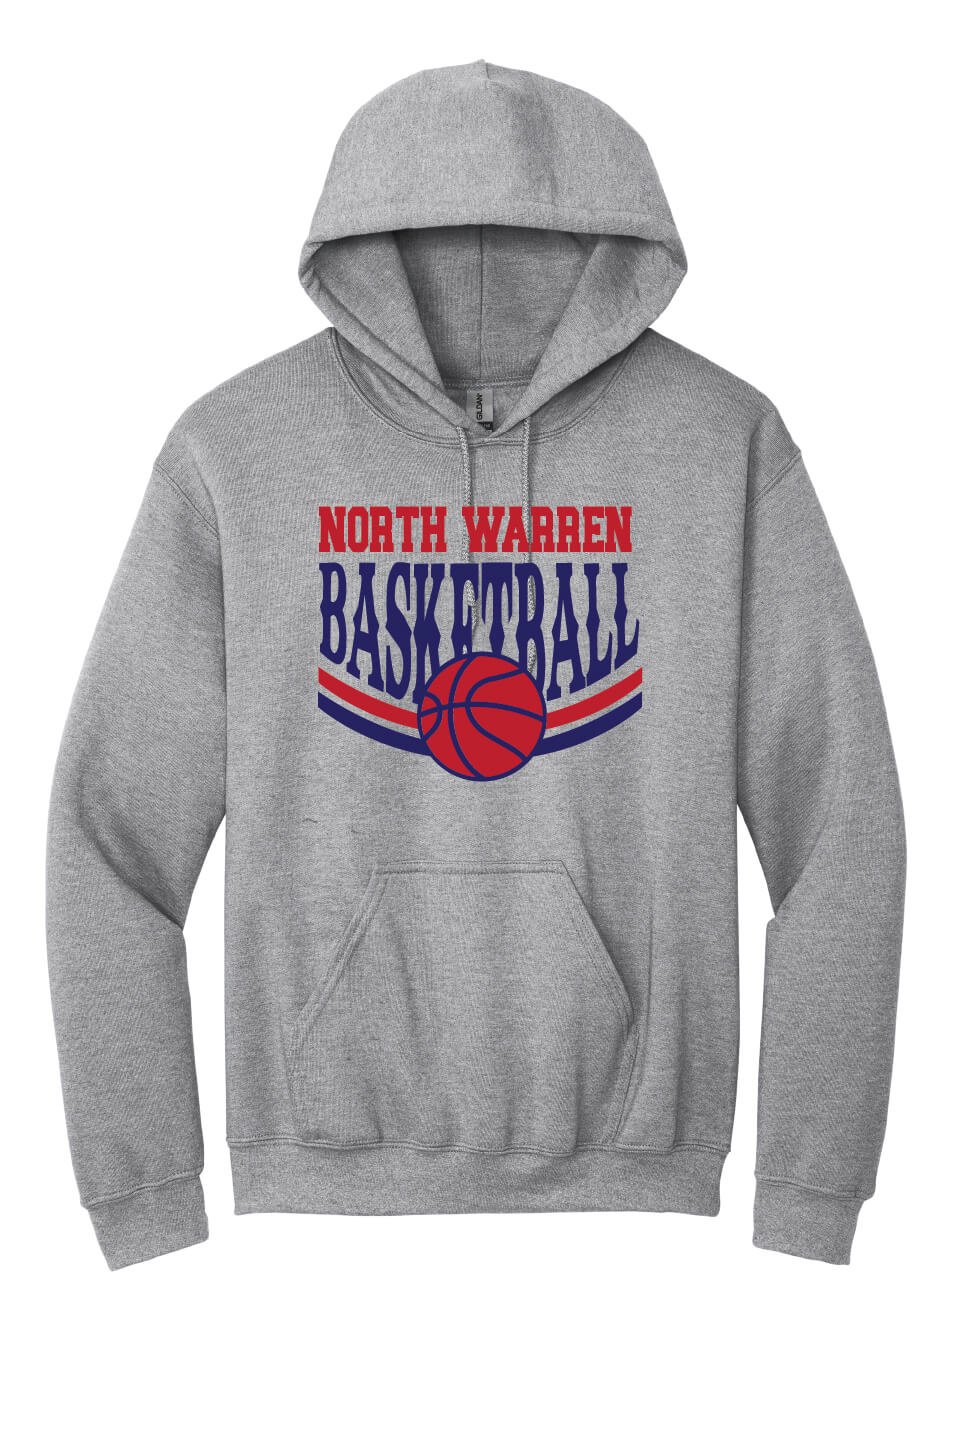 NW Basketball Hoodie (Youth) gray